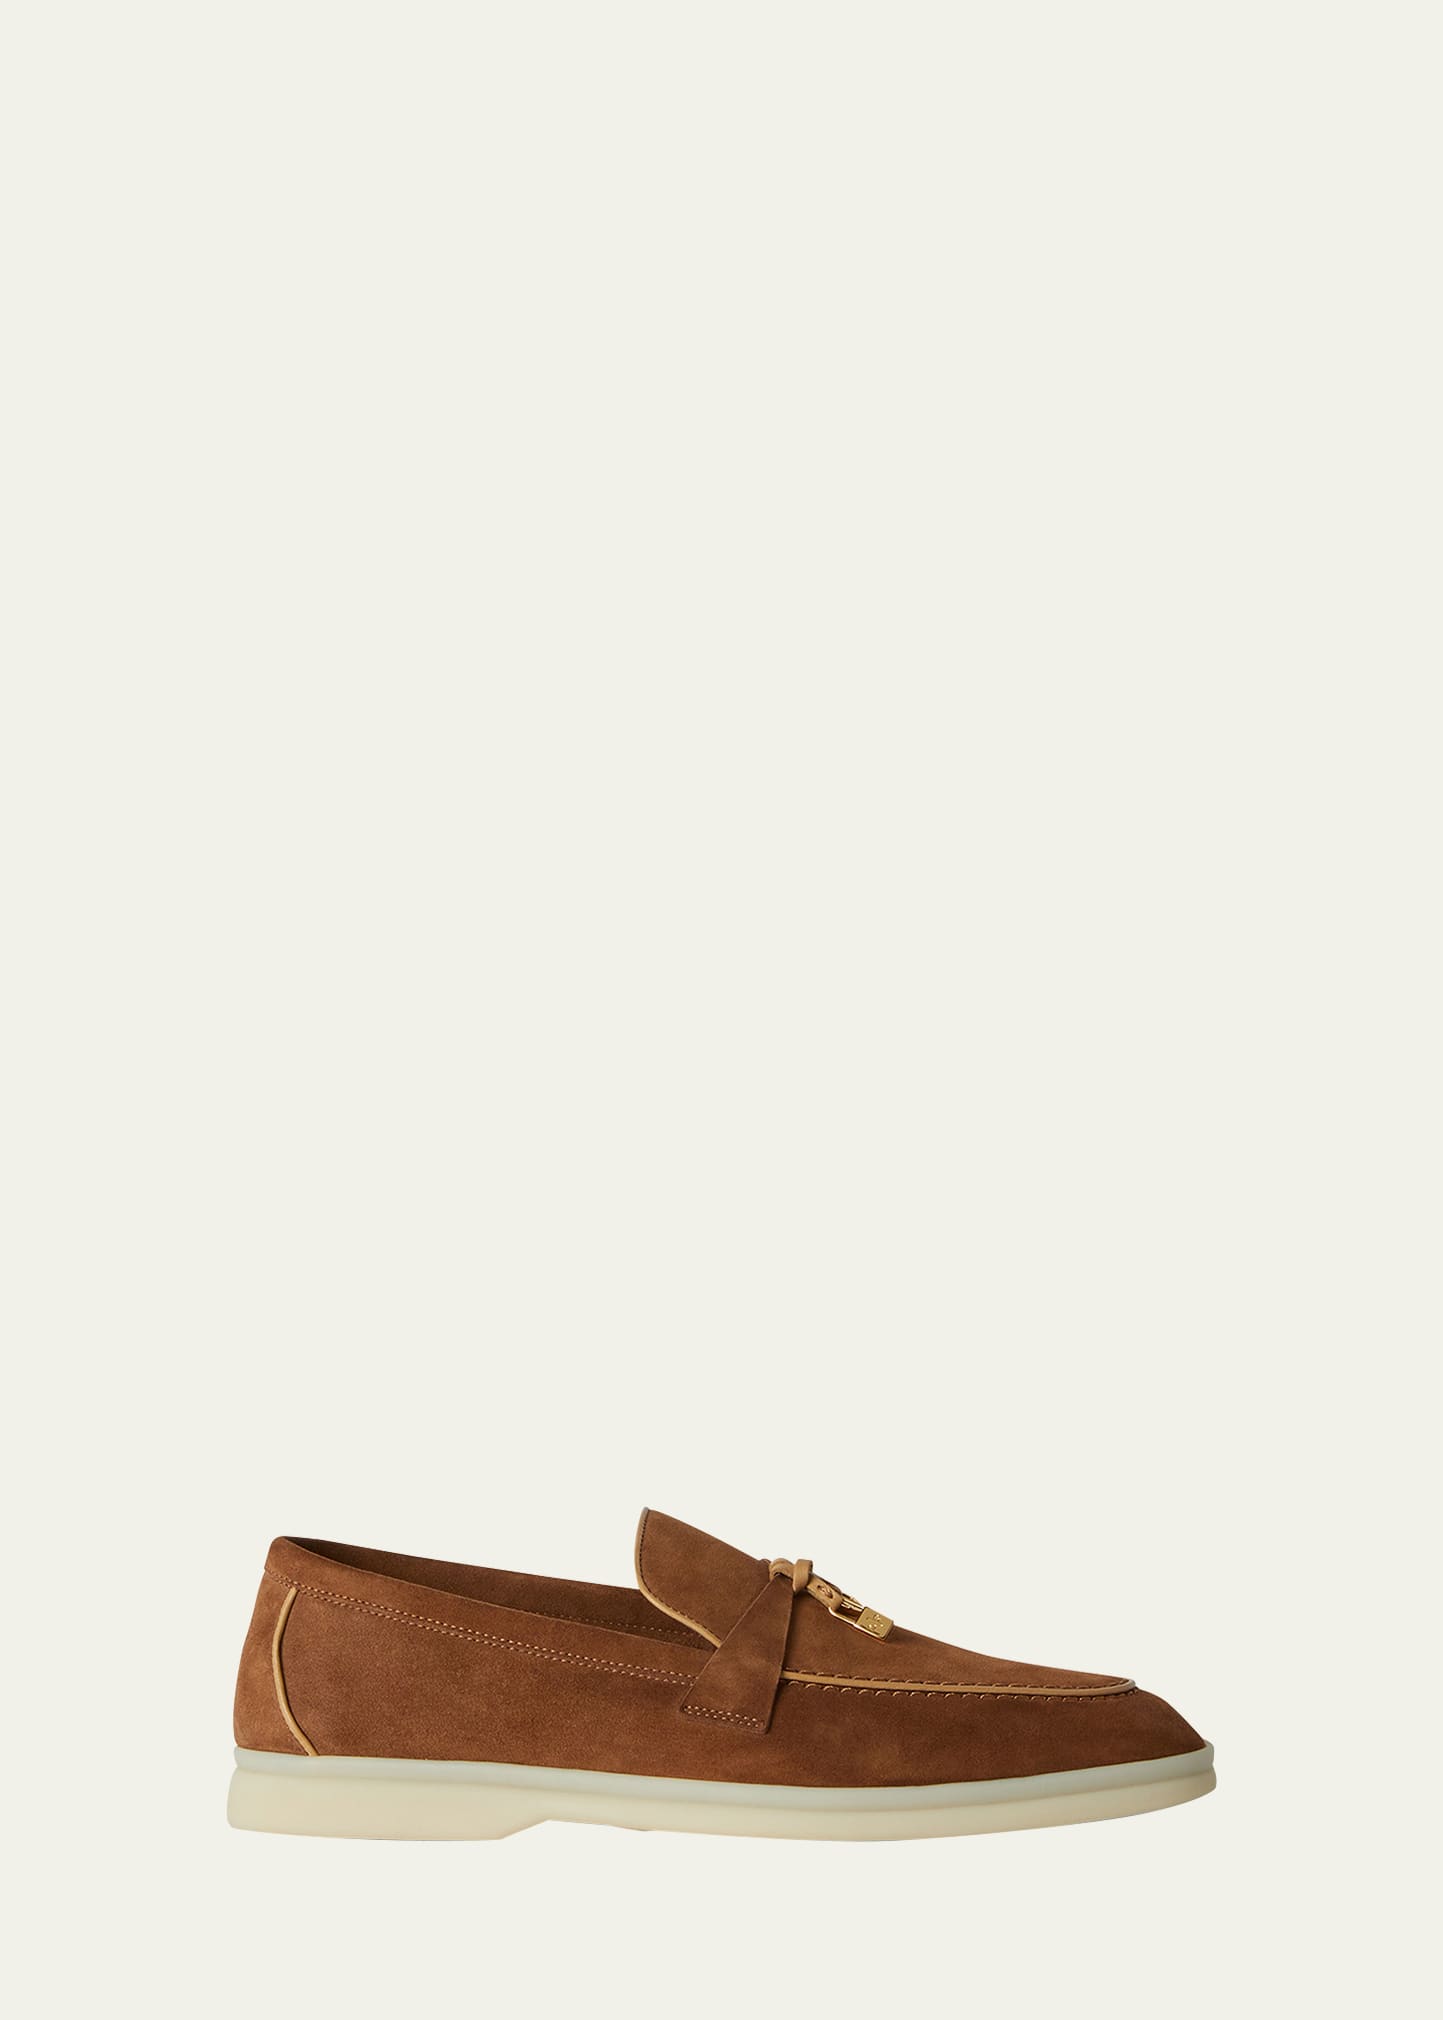 Loro Piana Summer Suede Charms Loafers In Ha85 Clove